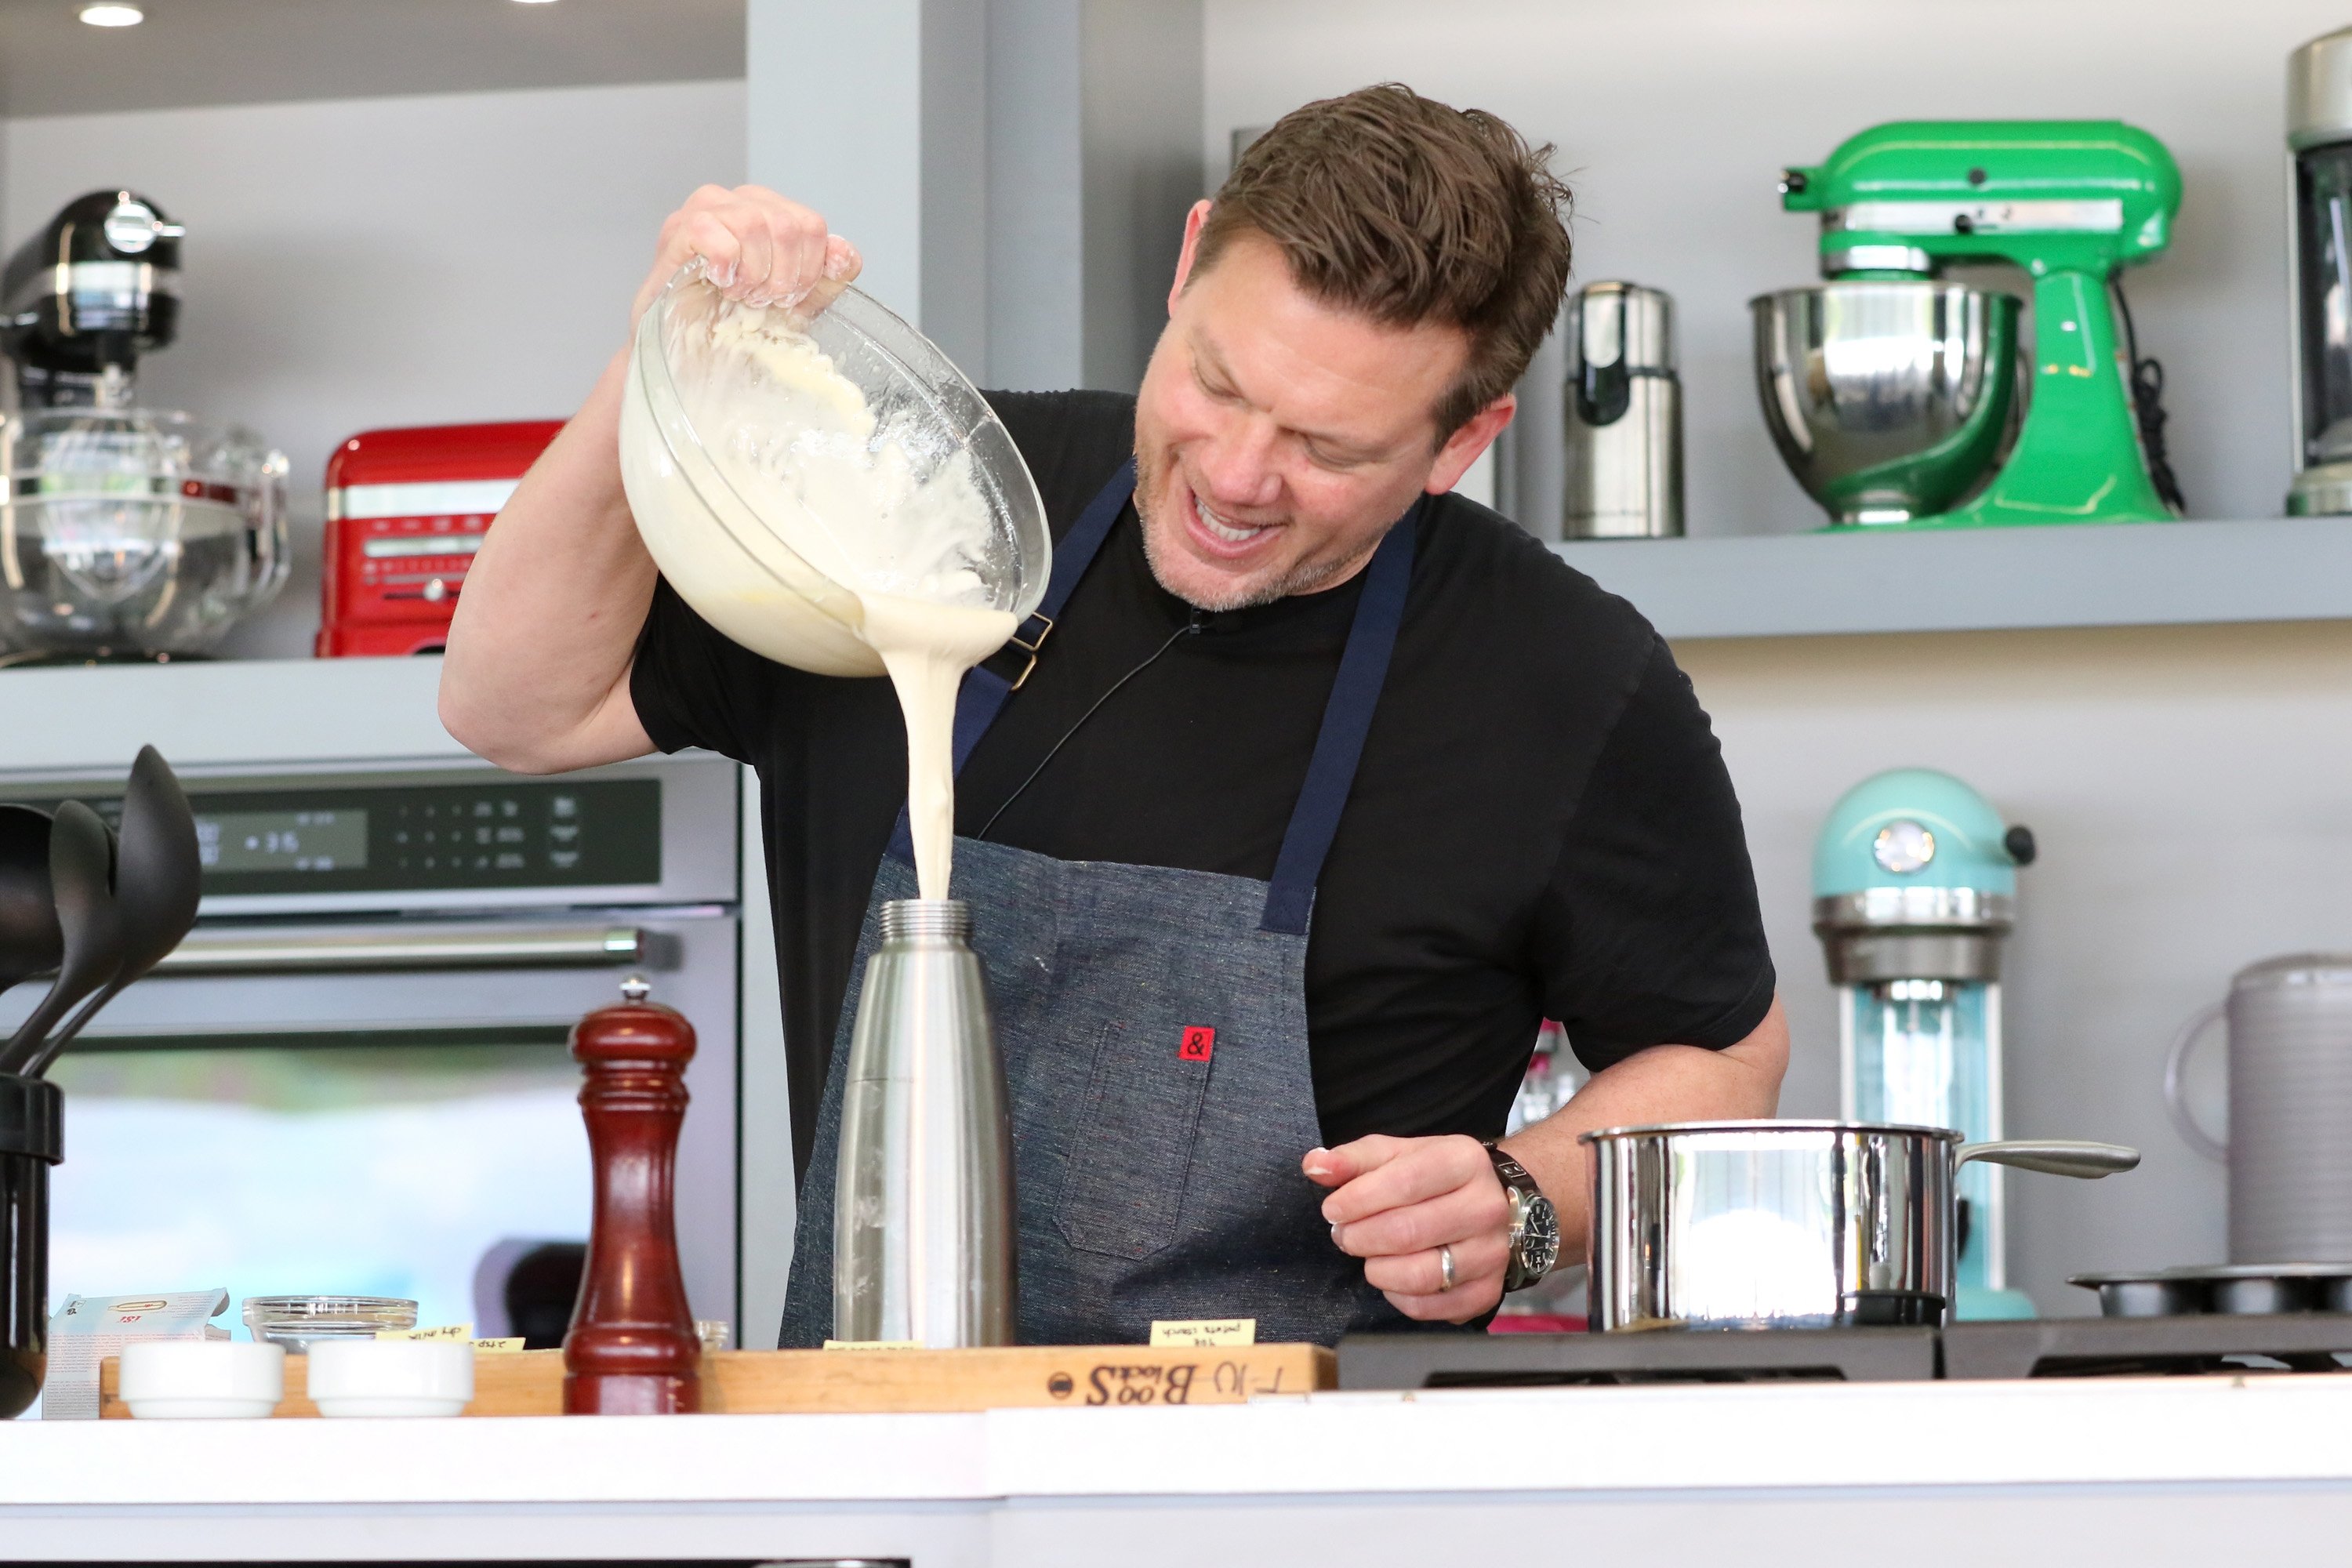 Food Network personality Tyler Florence prepares a dish in this photograph.